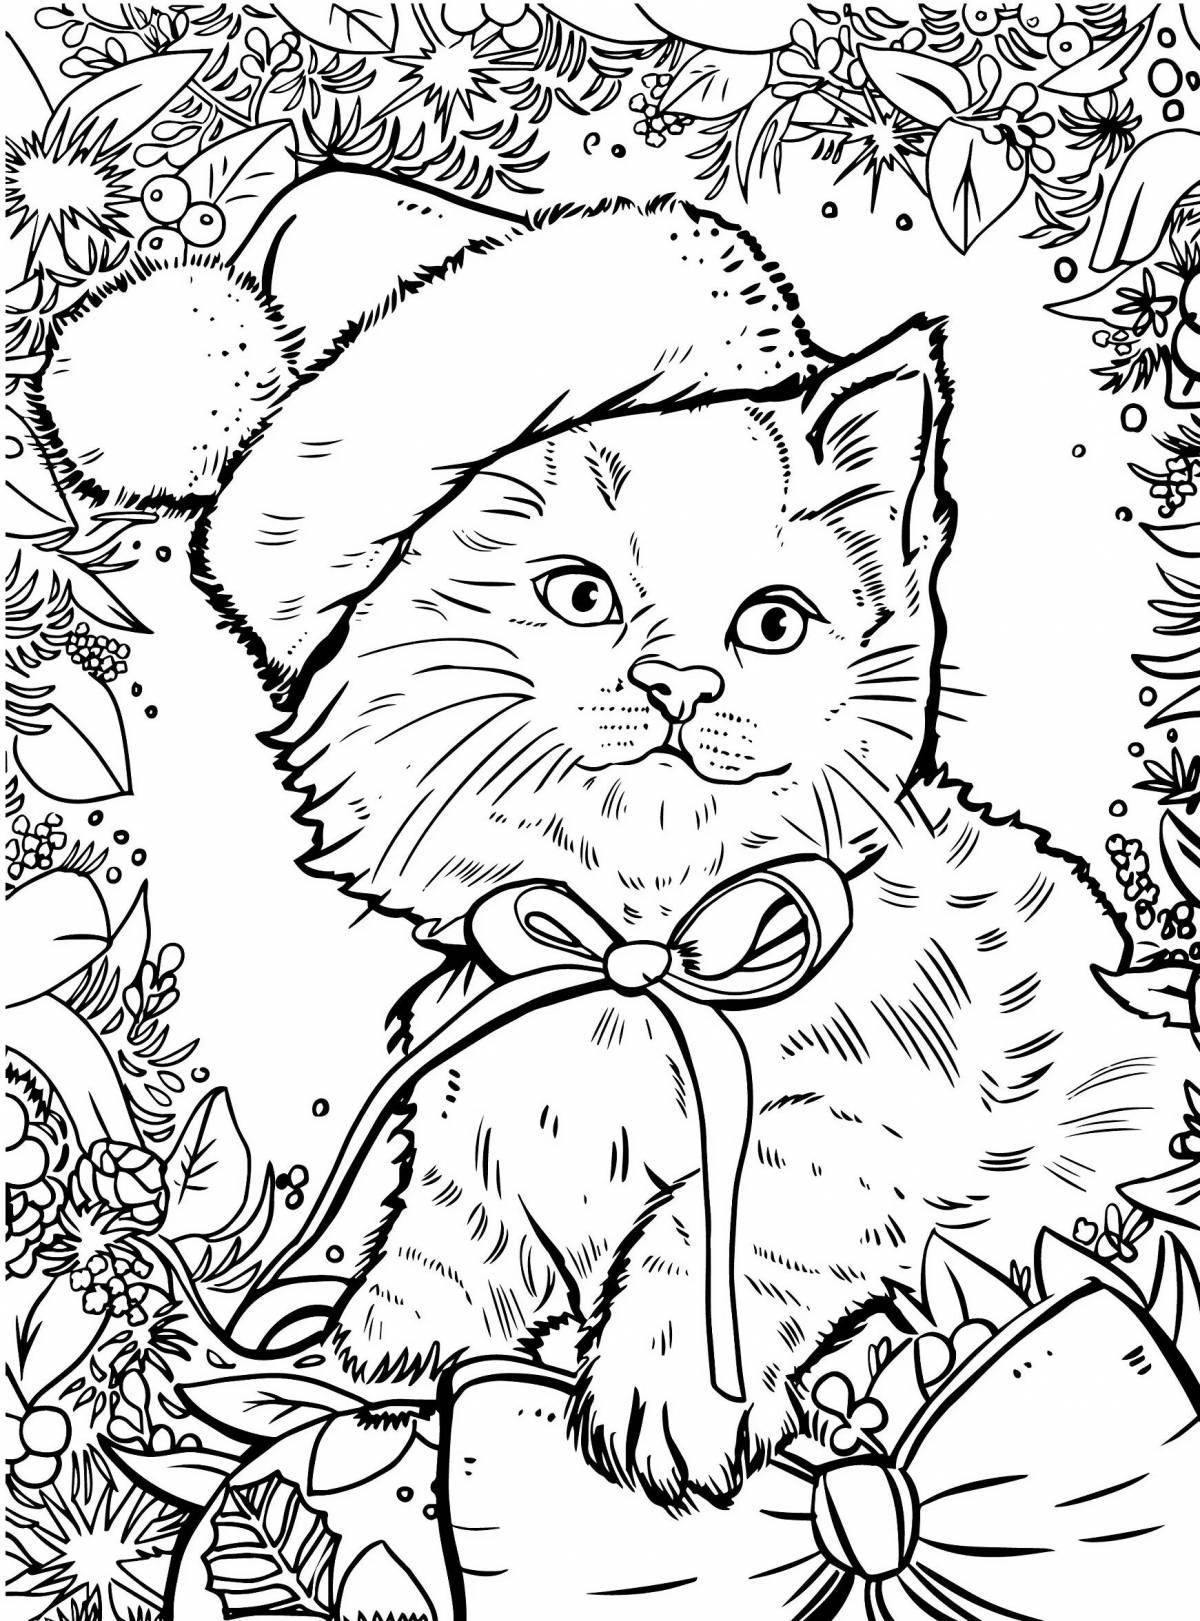 Coloring page adorable cat in a hat